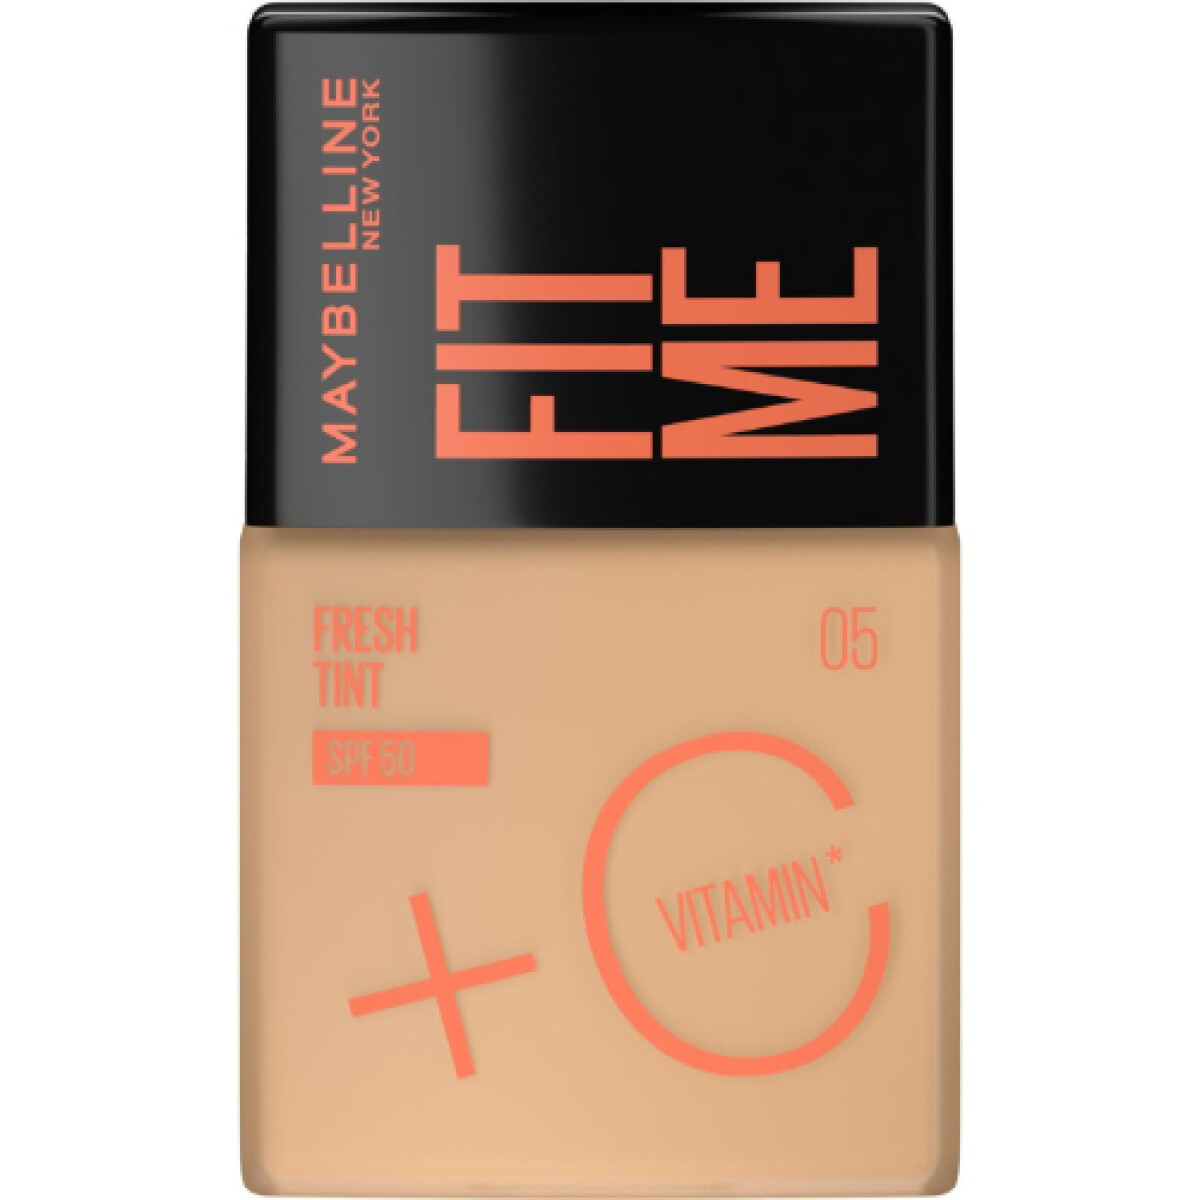 Base Maybelline Fit Me Fresh Tint SPF50 - 05 